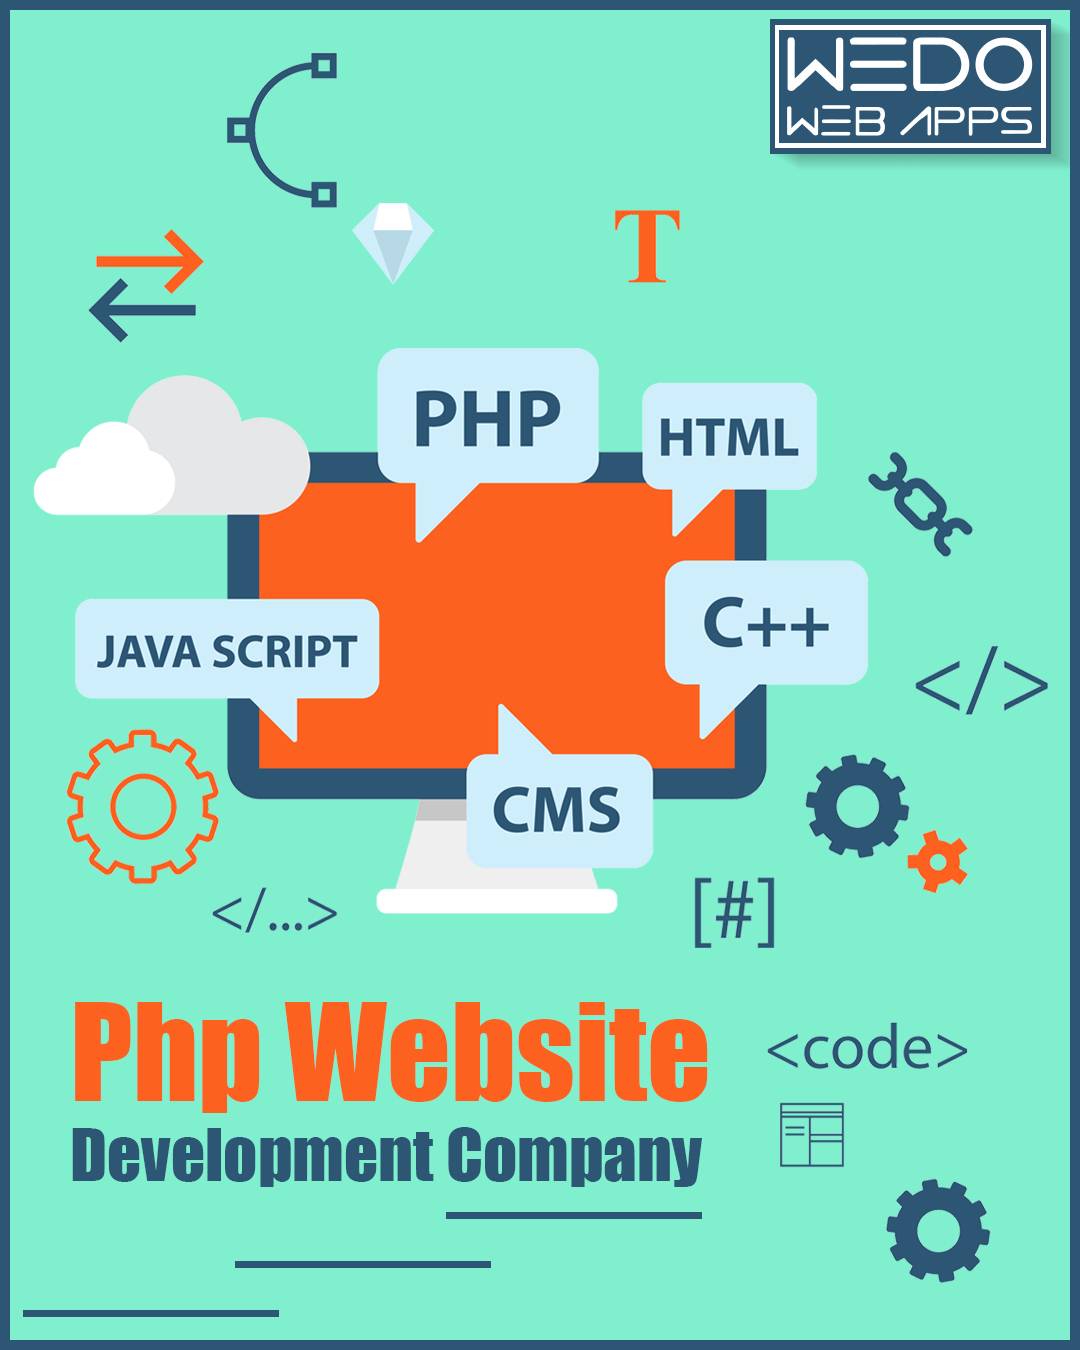 How PHP 7.X Can Add Benefit to Website Development?